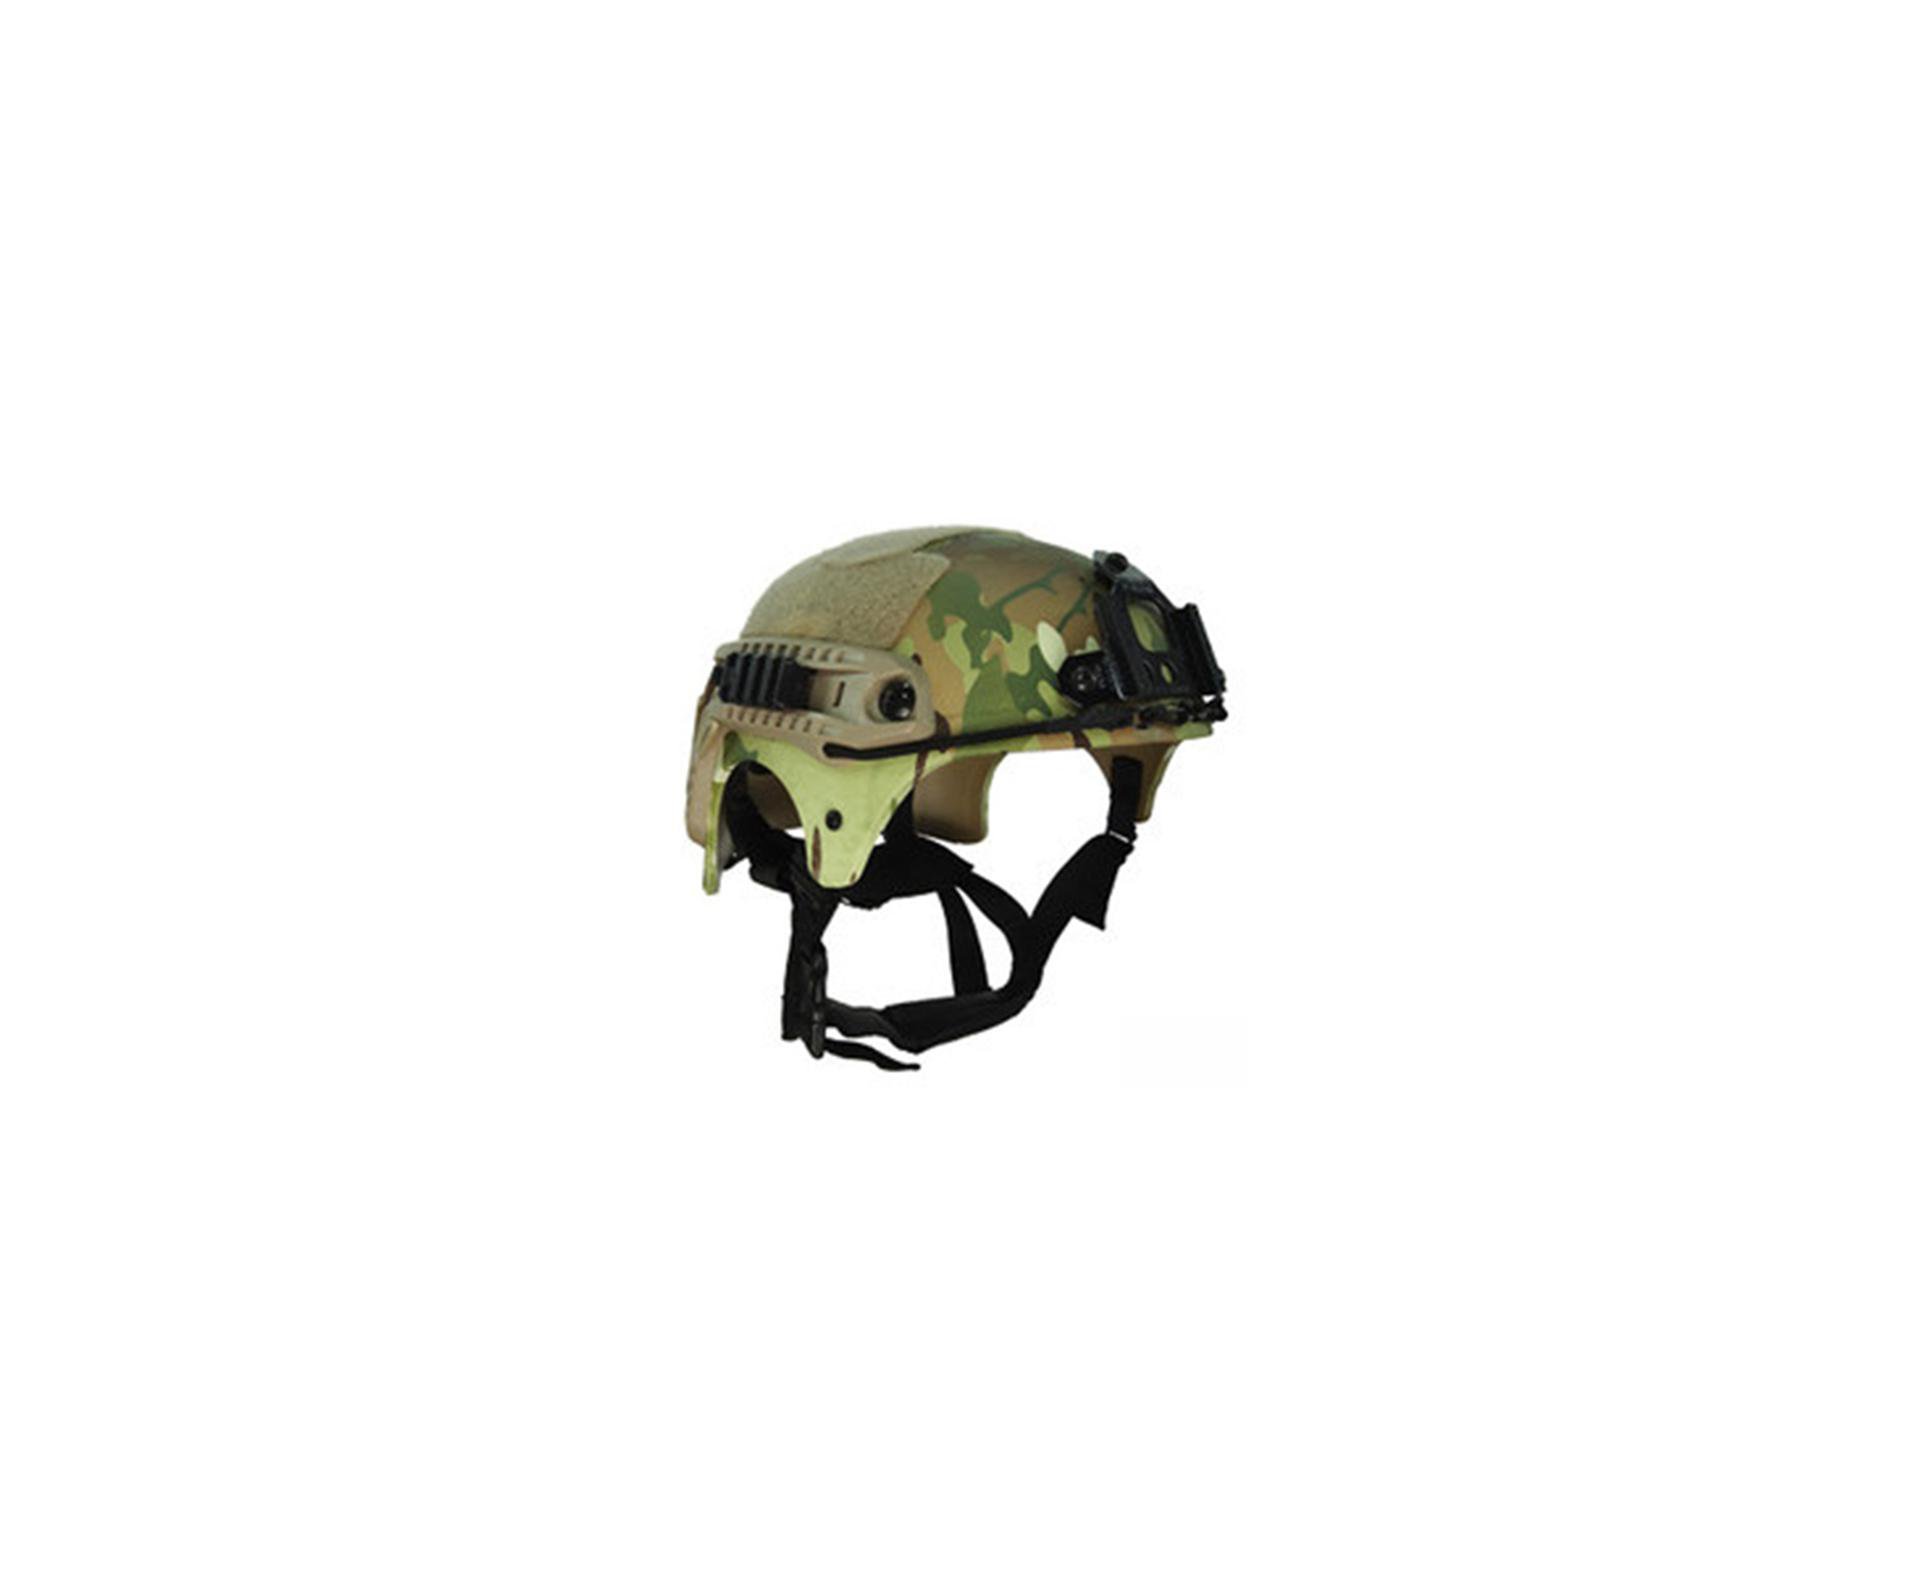 Capacete Tático Para Airsoft/paintball Mod Ibh X Multican